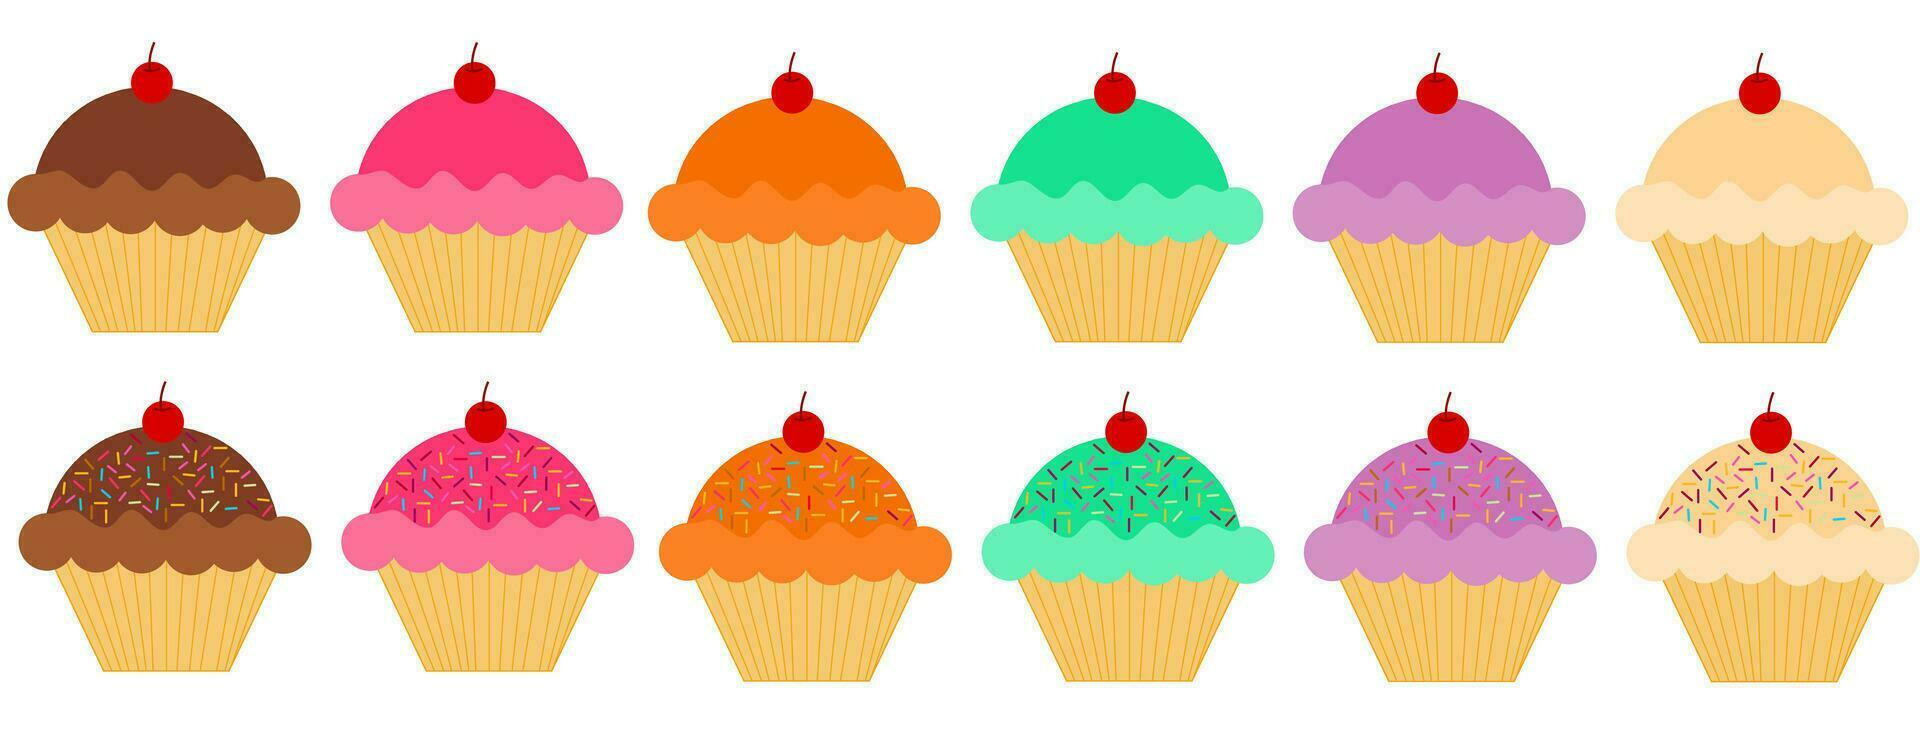 Set of cute cupcakes and muffins.Sweet dessert.Cartoon vector illustration.